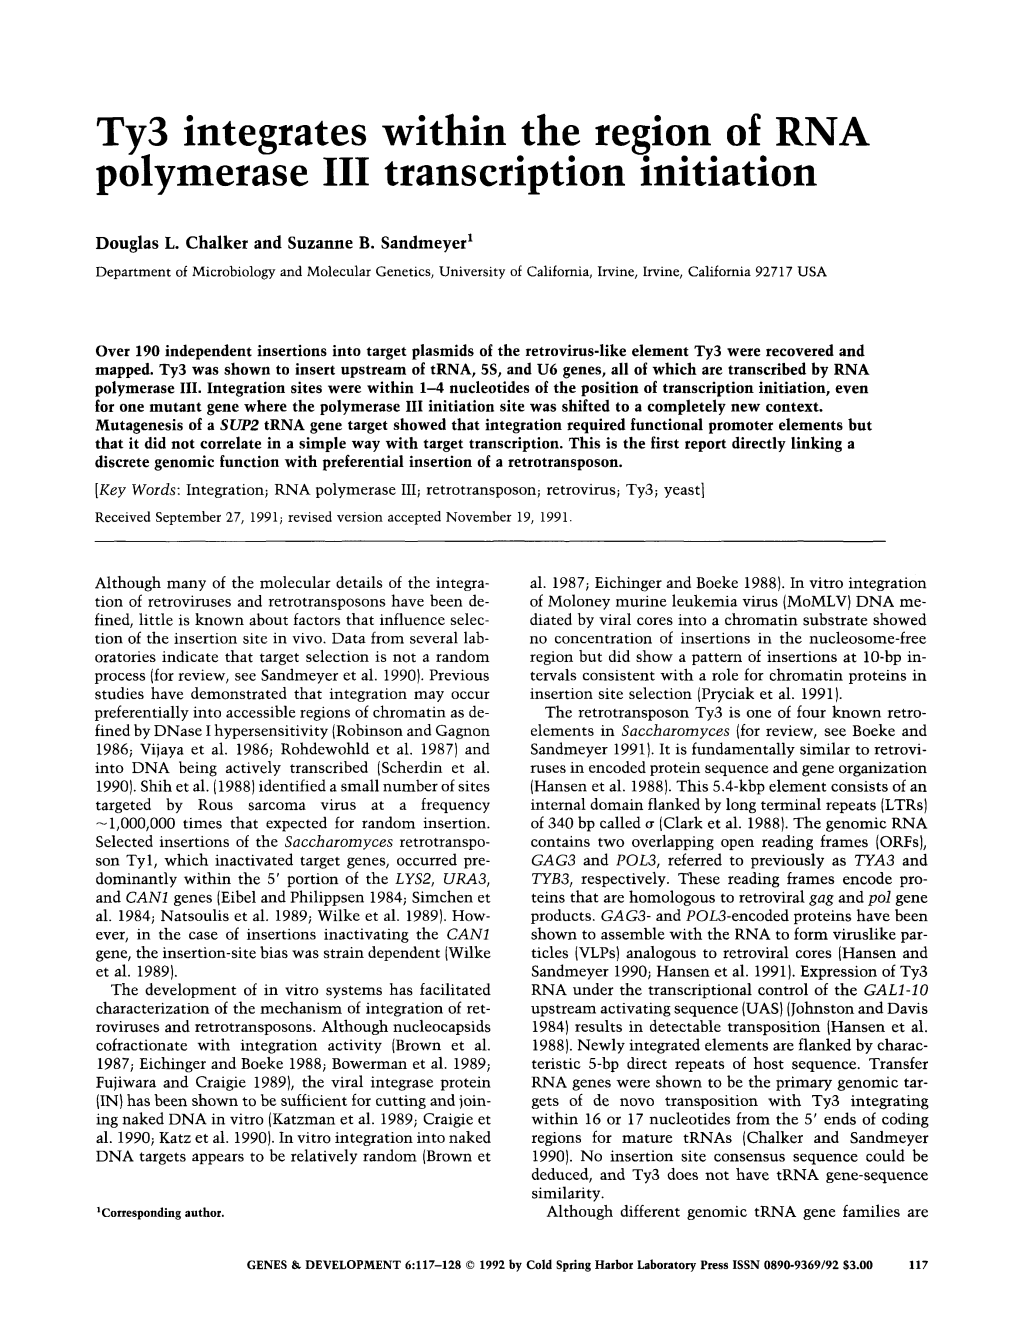 Ty3 Integrates Within the Region of RNA Polymerase III Transcription Initiation